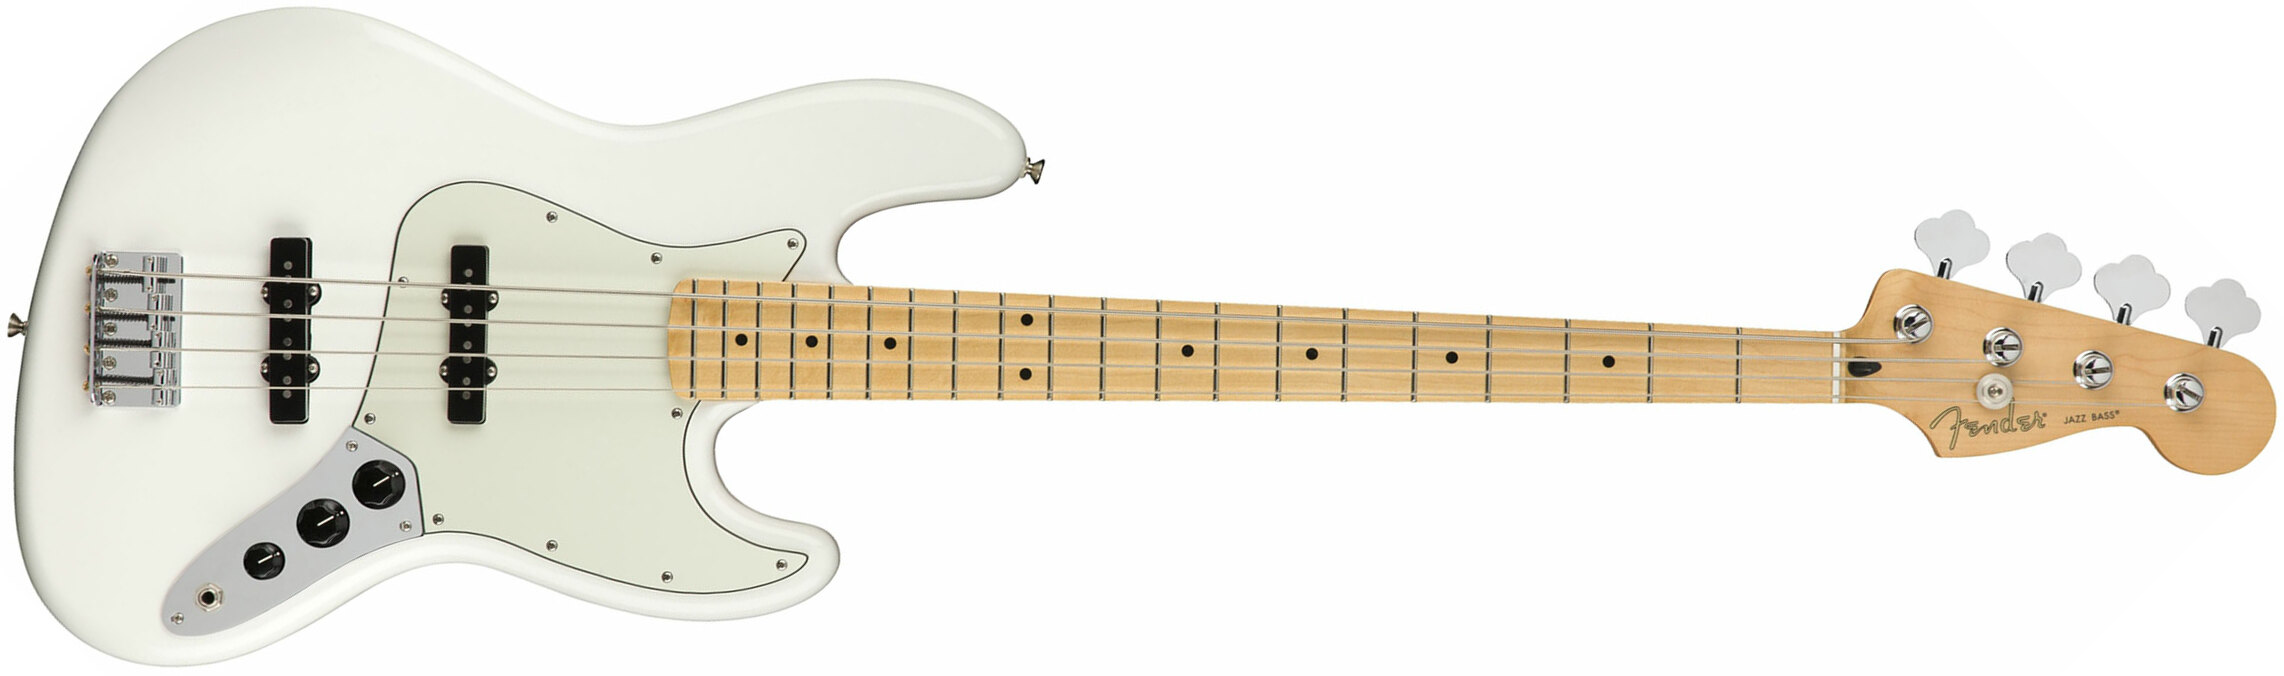 Fender Jazz Bass Player Mex Mn - Polar White - Solid body electric bass - Main picture